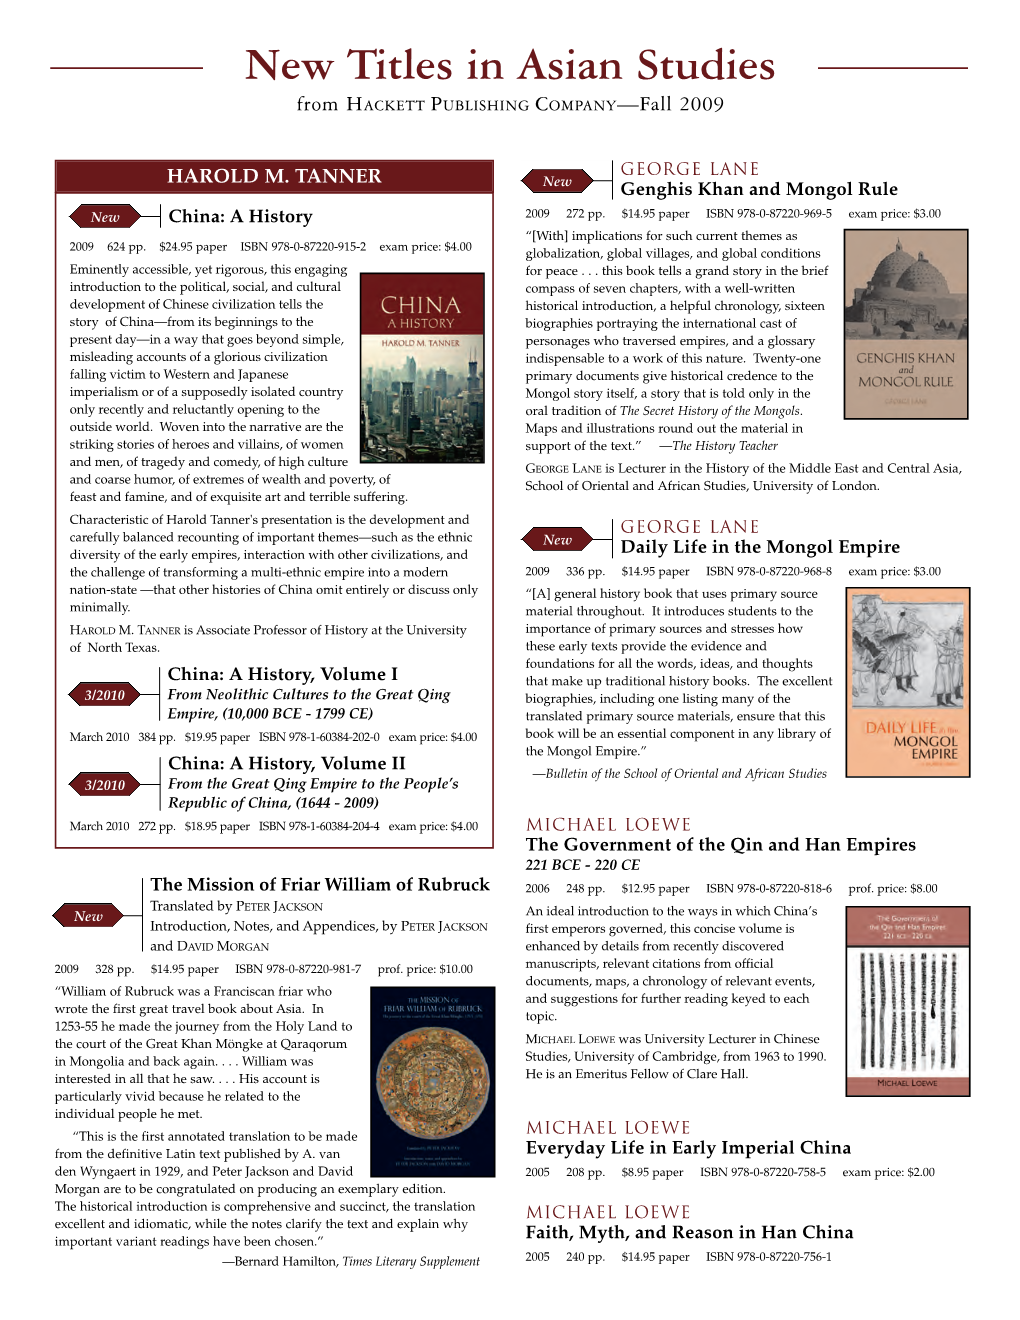 New Titles in Asian Studies from HACKETT PUBLISHING COMPANY—Fall 2009